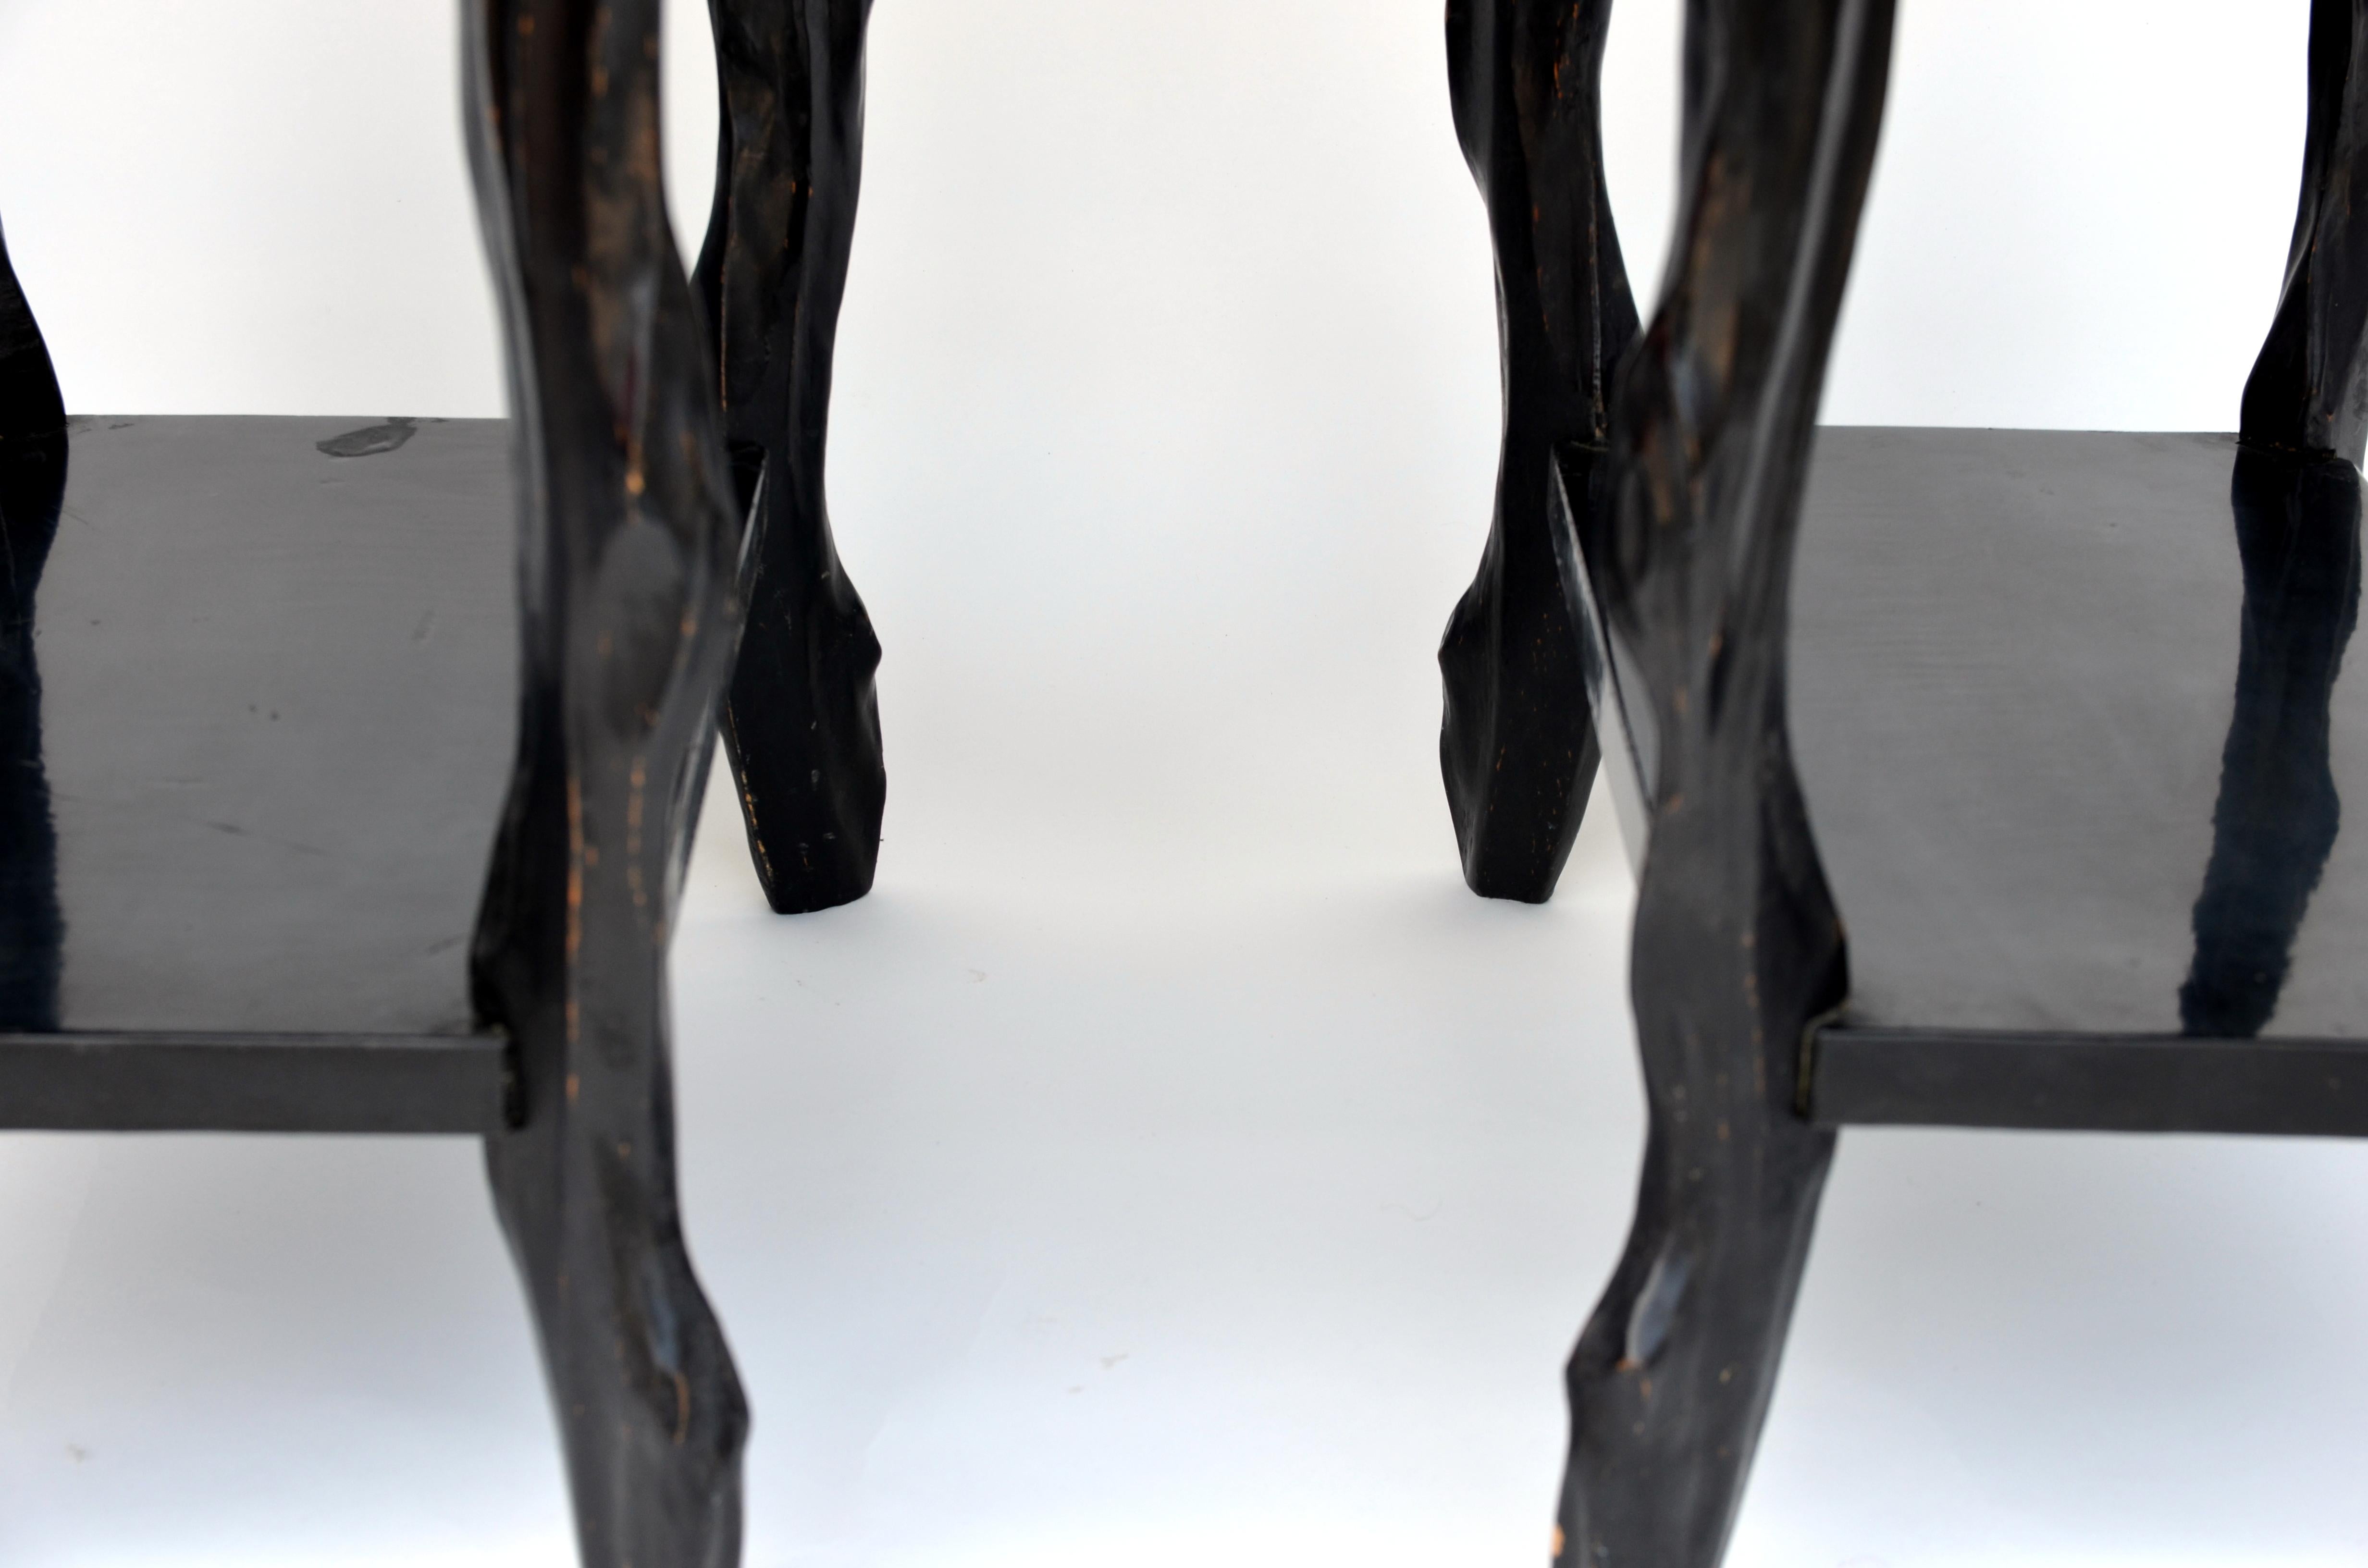 Lacquered Pair of Black Lacquer Ebonized and Inlaid Wood Organic End Tables For Sale